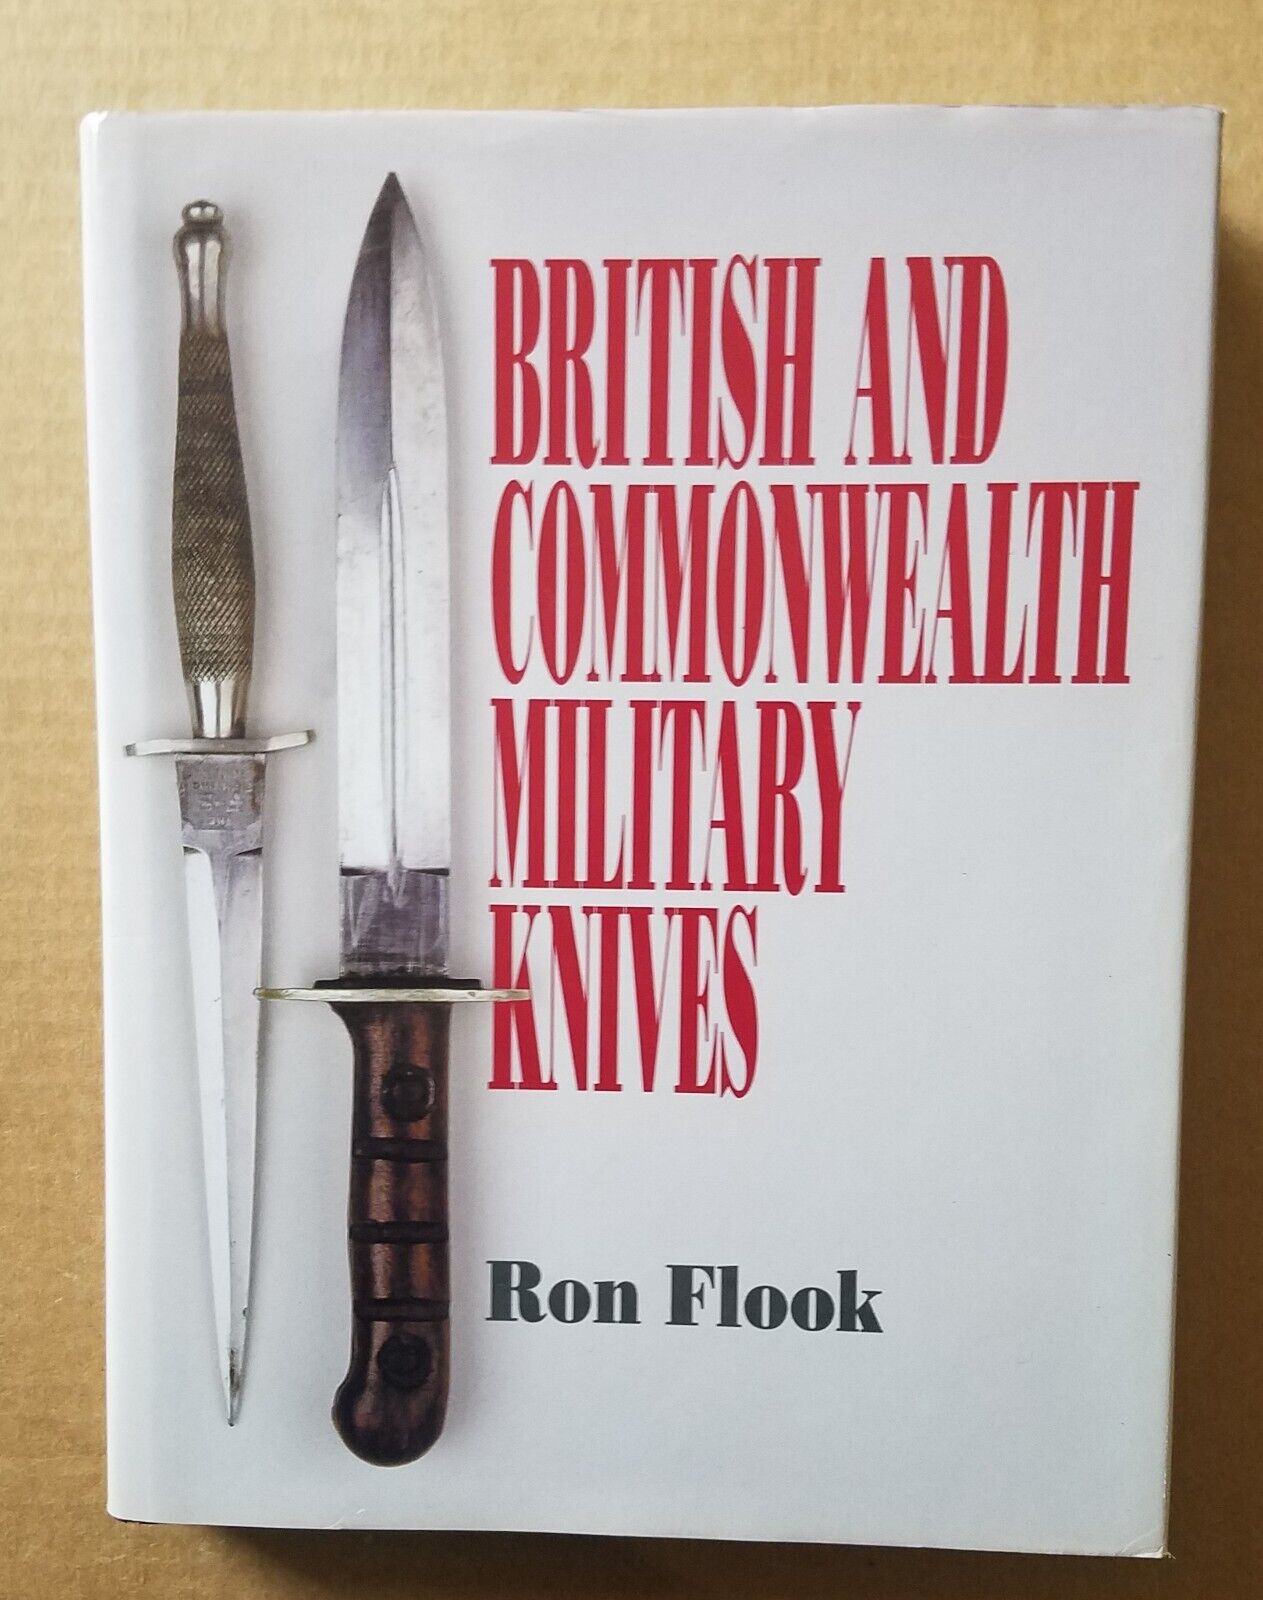 British and Commonwealth Military Knives by Ron Flook - Hardcover Book